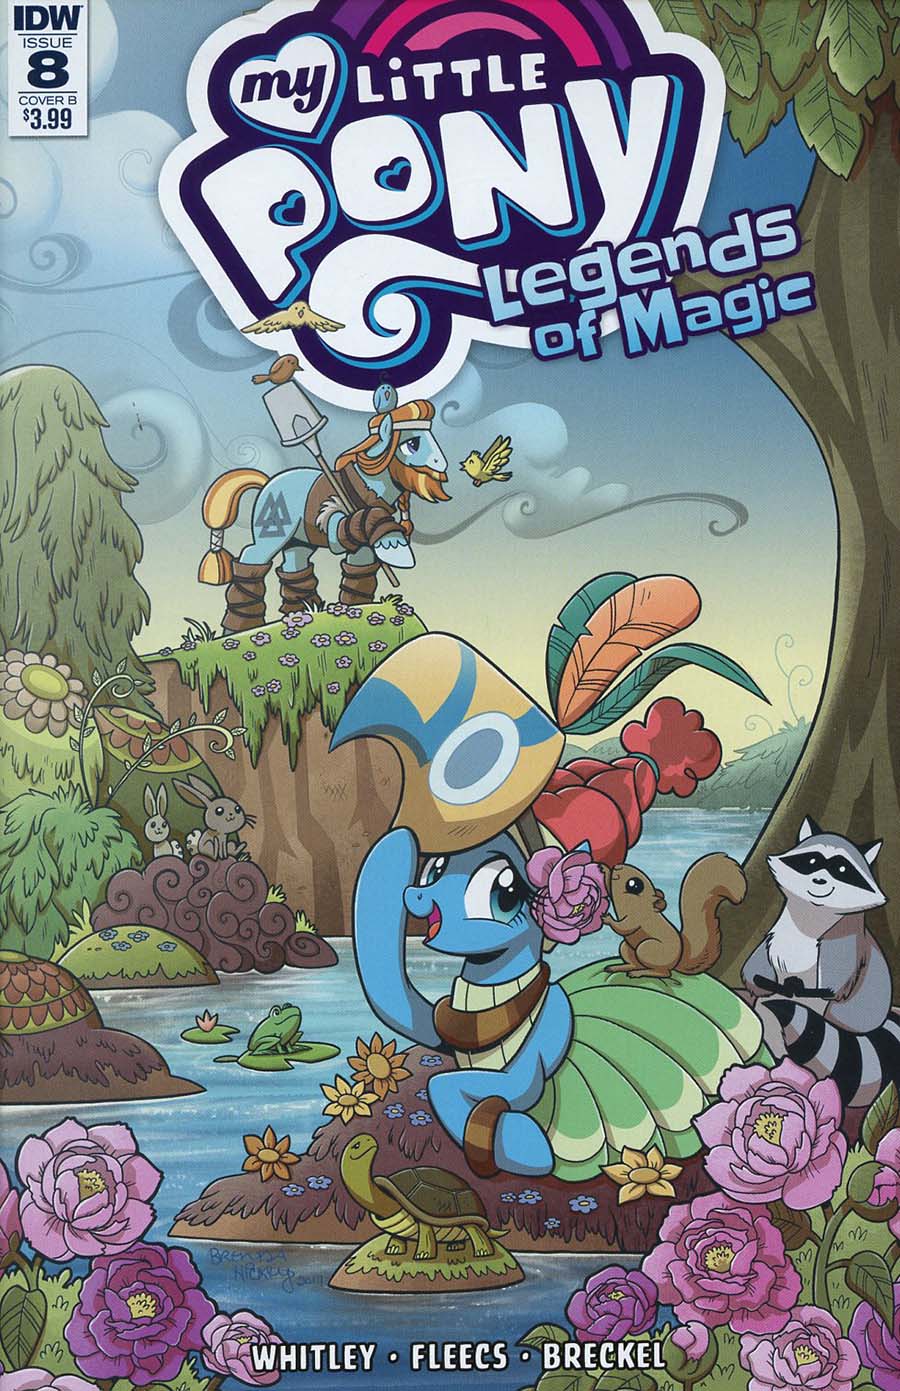 My Little Pony Legends Of Magic #8 Cover B Variant Brenda Hickey Cover